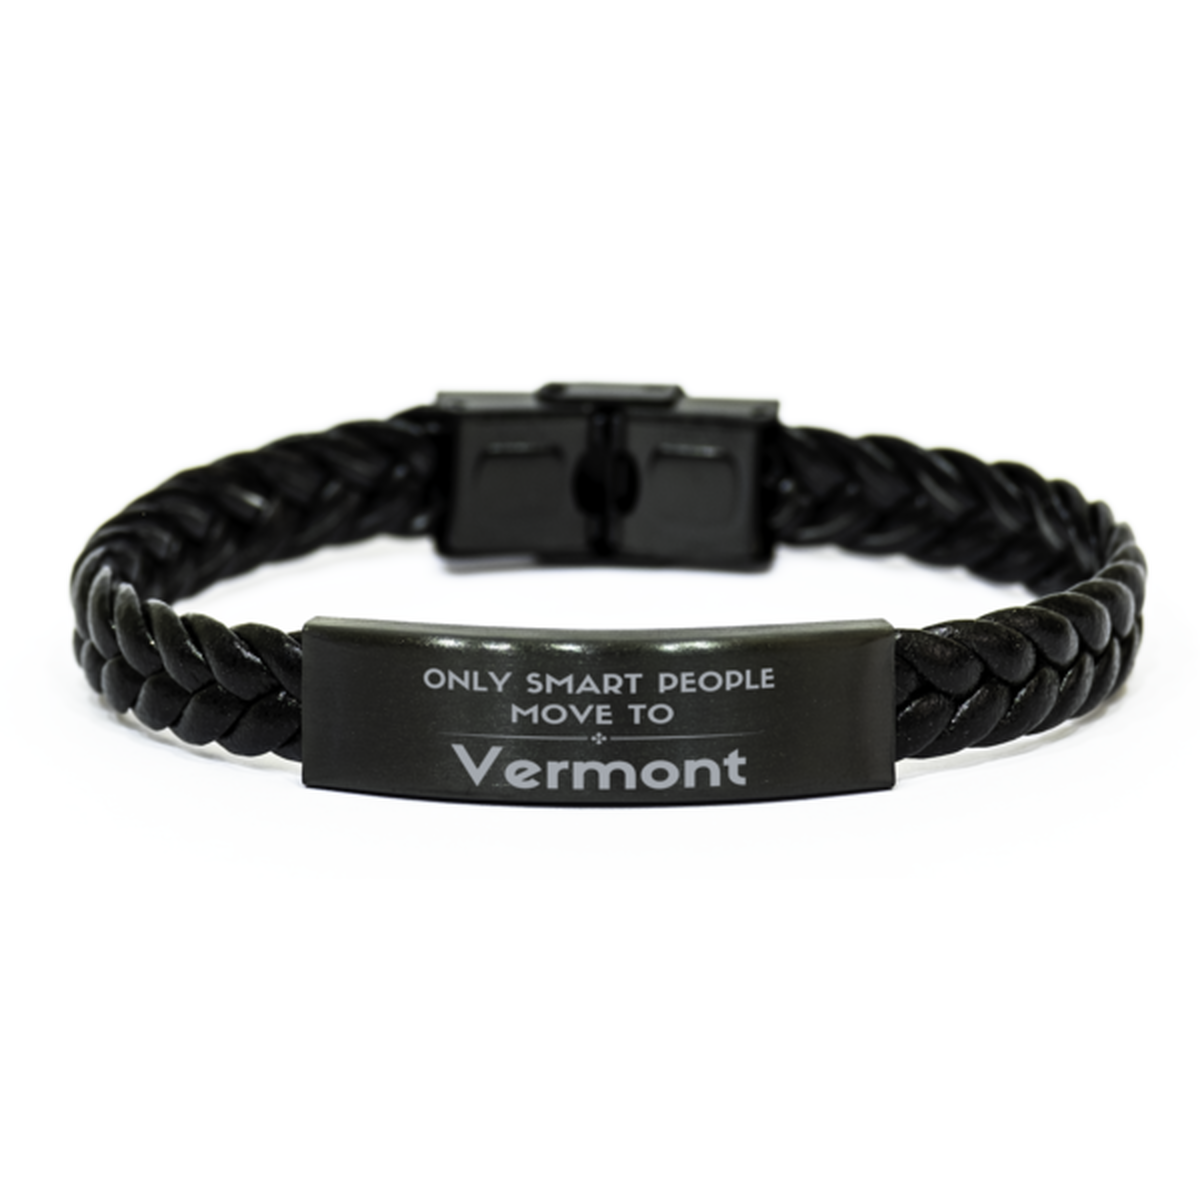 Only smart people move to Vermont Braided Leather Bracelet, Gag Gifts For Vermont, Move to Vermont Gifts for Friends Coworker Funny Saying Quote